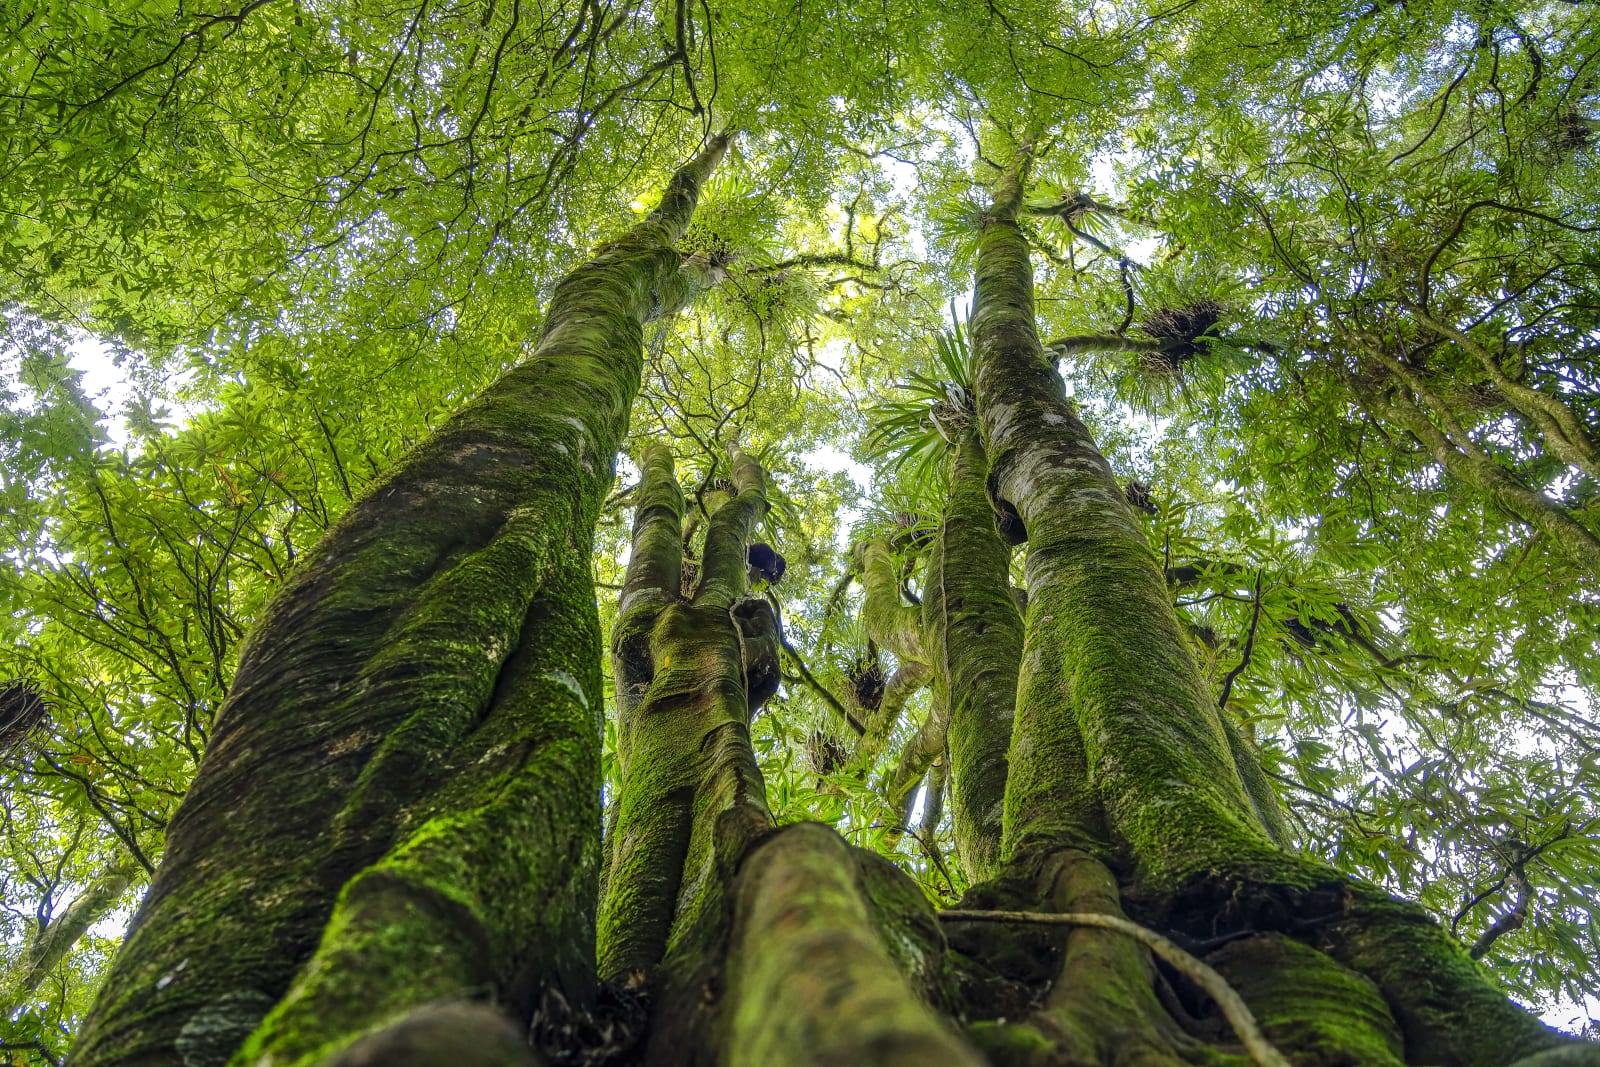 Ground view of tall, mossy trees